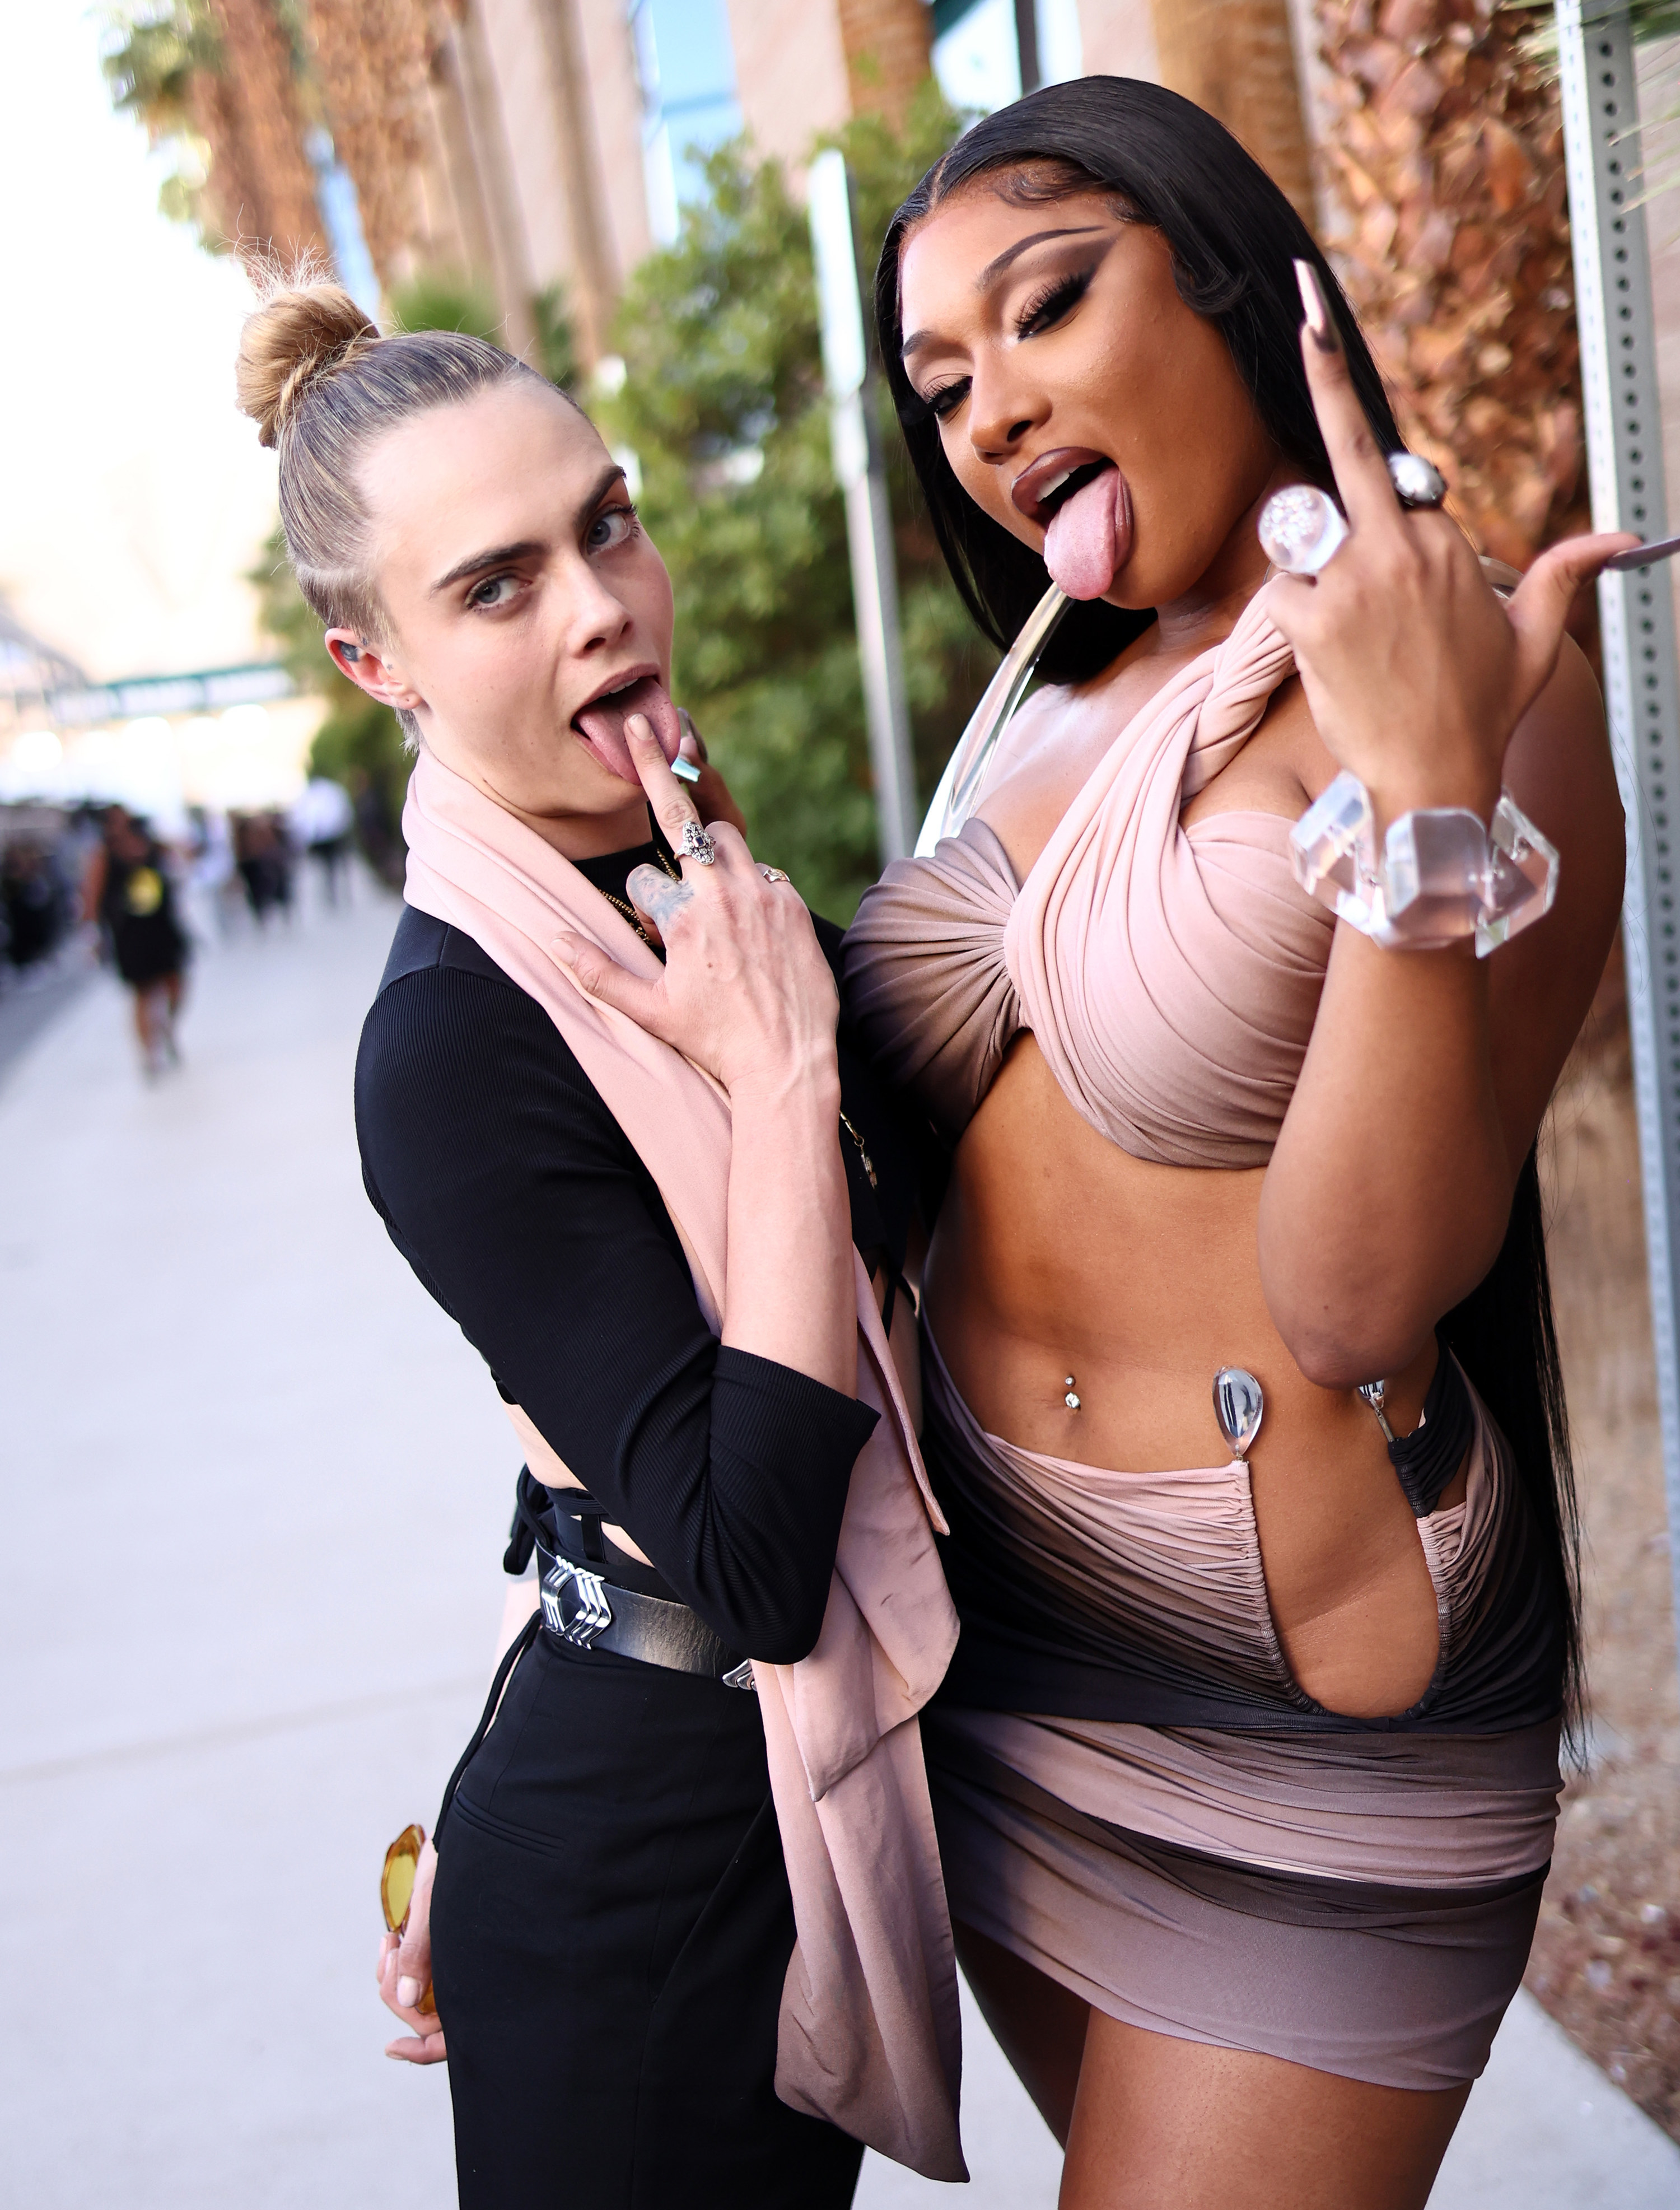 Cara and Megan both flipping off the camera with their tongues out